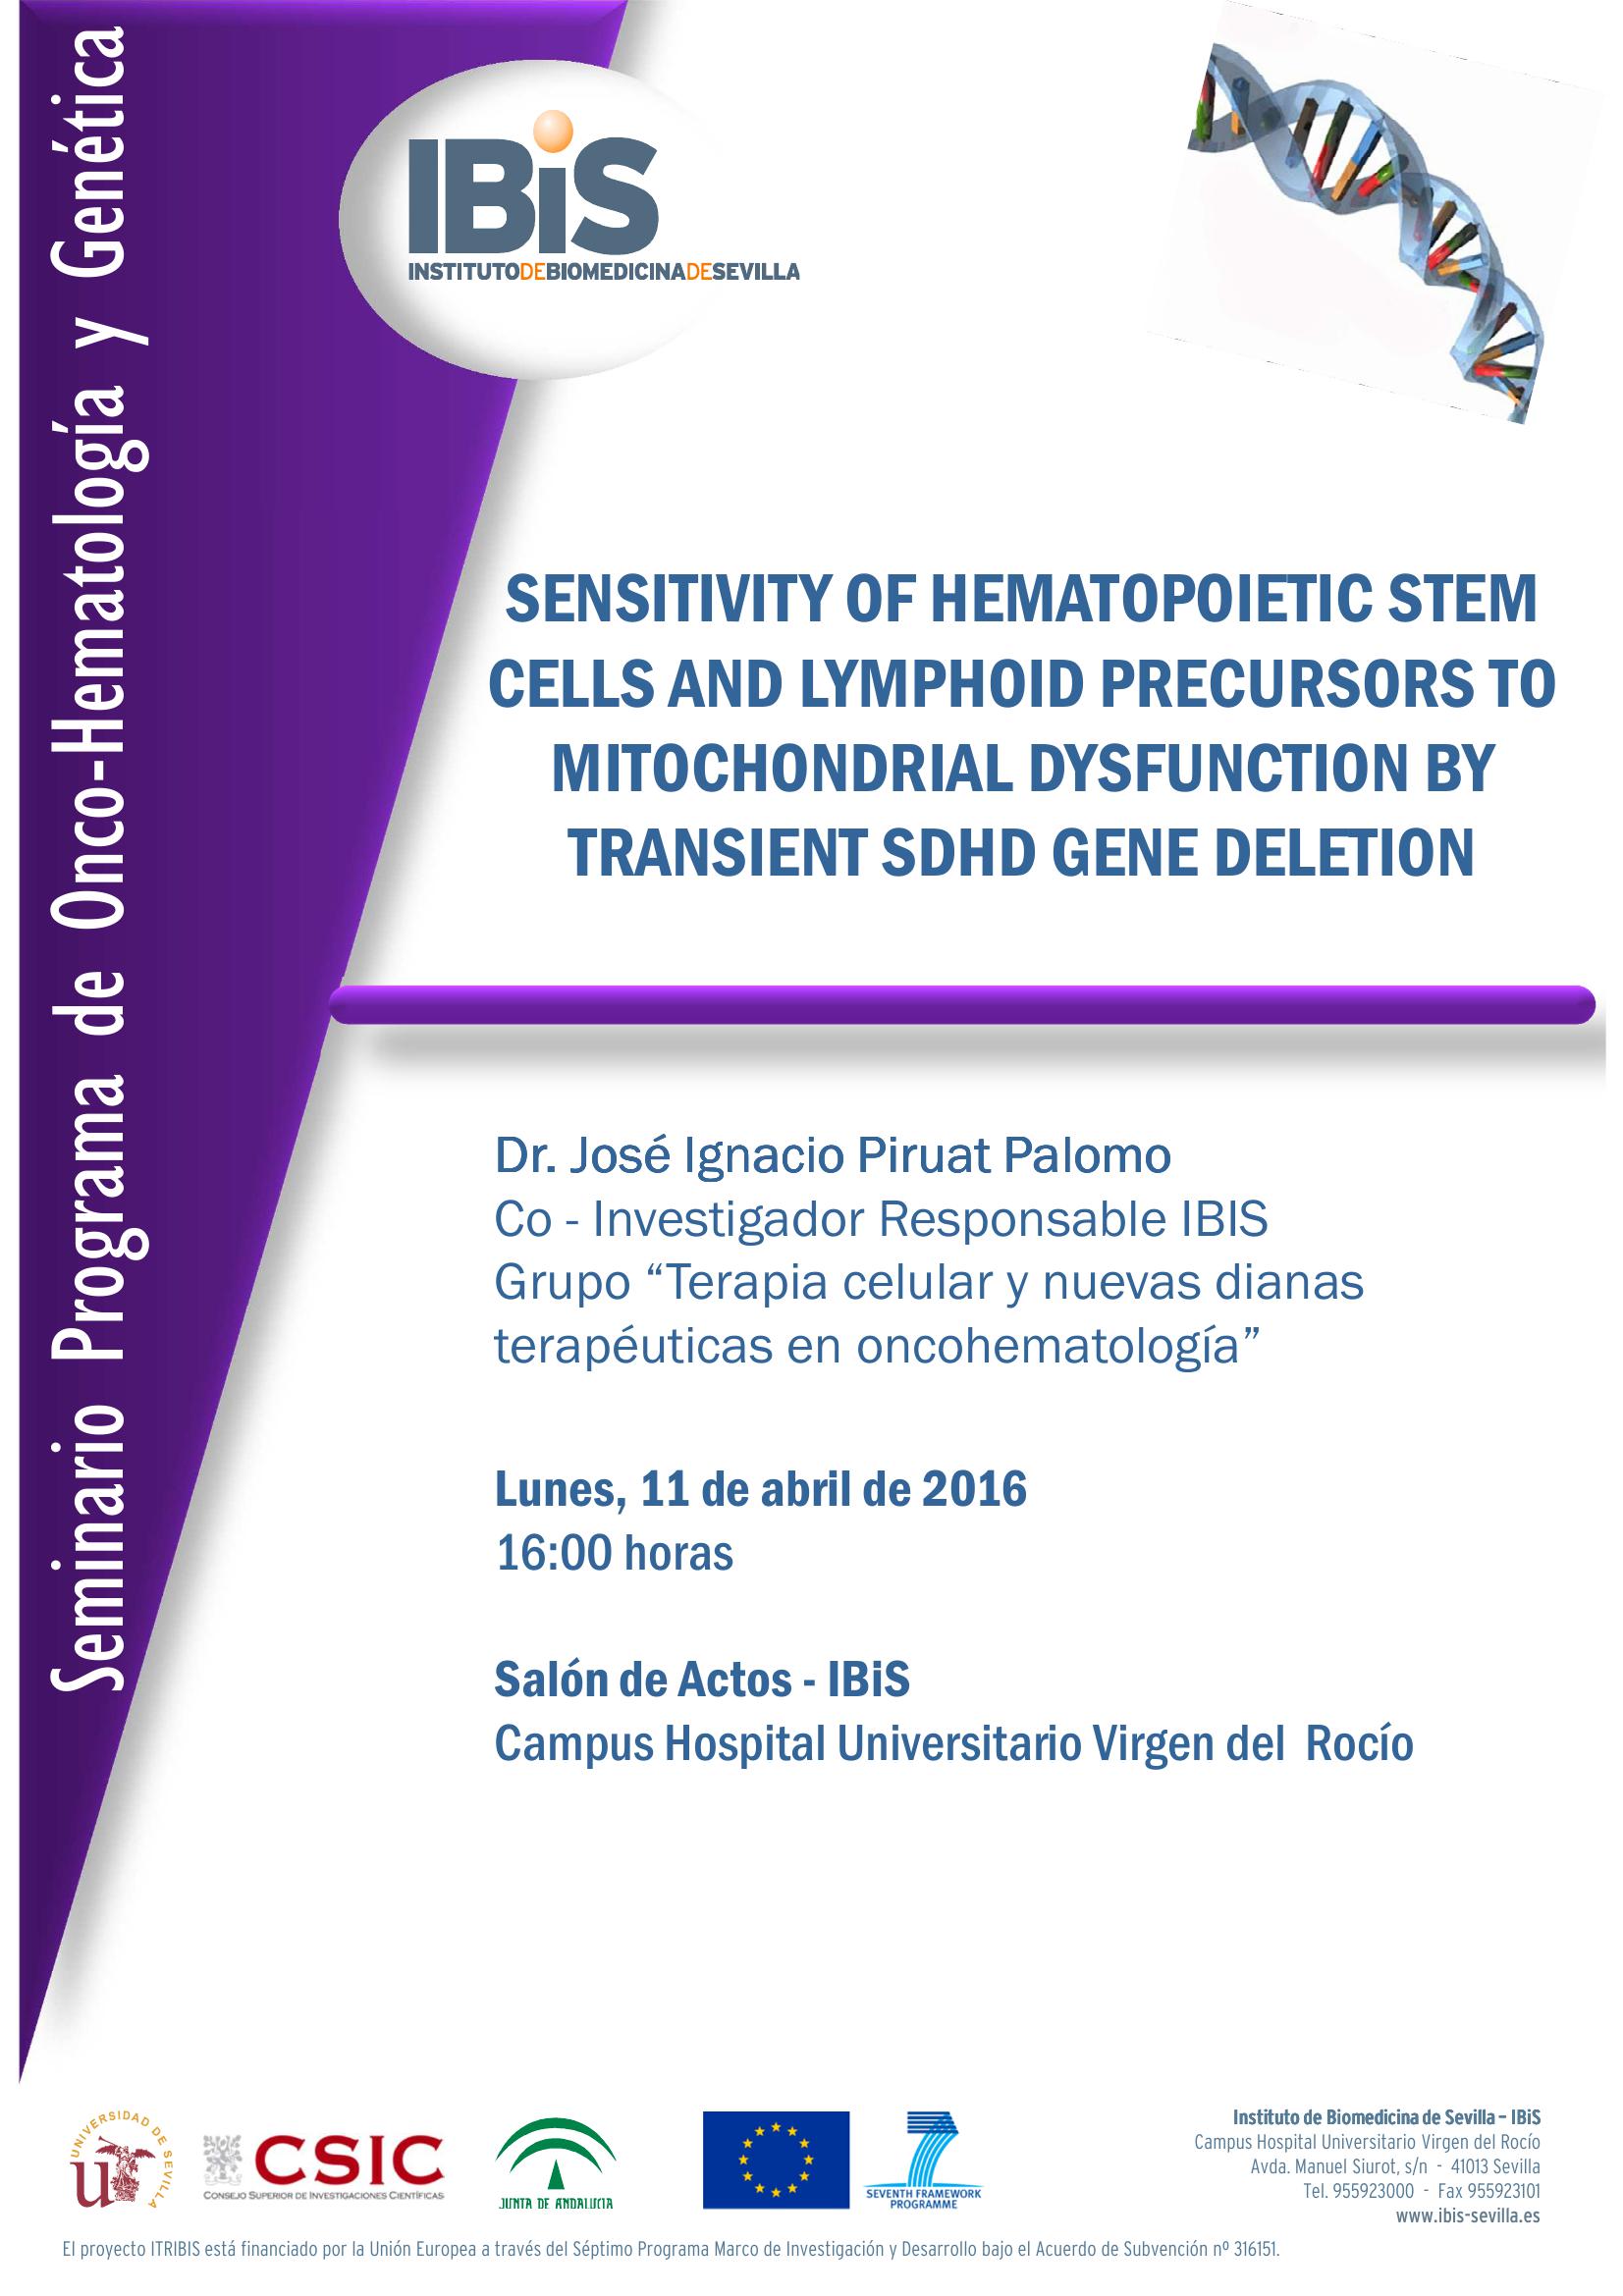 Poster: SENSITIVITY OF HEMATOPOIETIC STEM CELLS AND LYMPHOID PRECURSORS TO MITOCHONDRIAL DYSFUNCTION BY TRANSIENT SDHD GENE DELETION